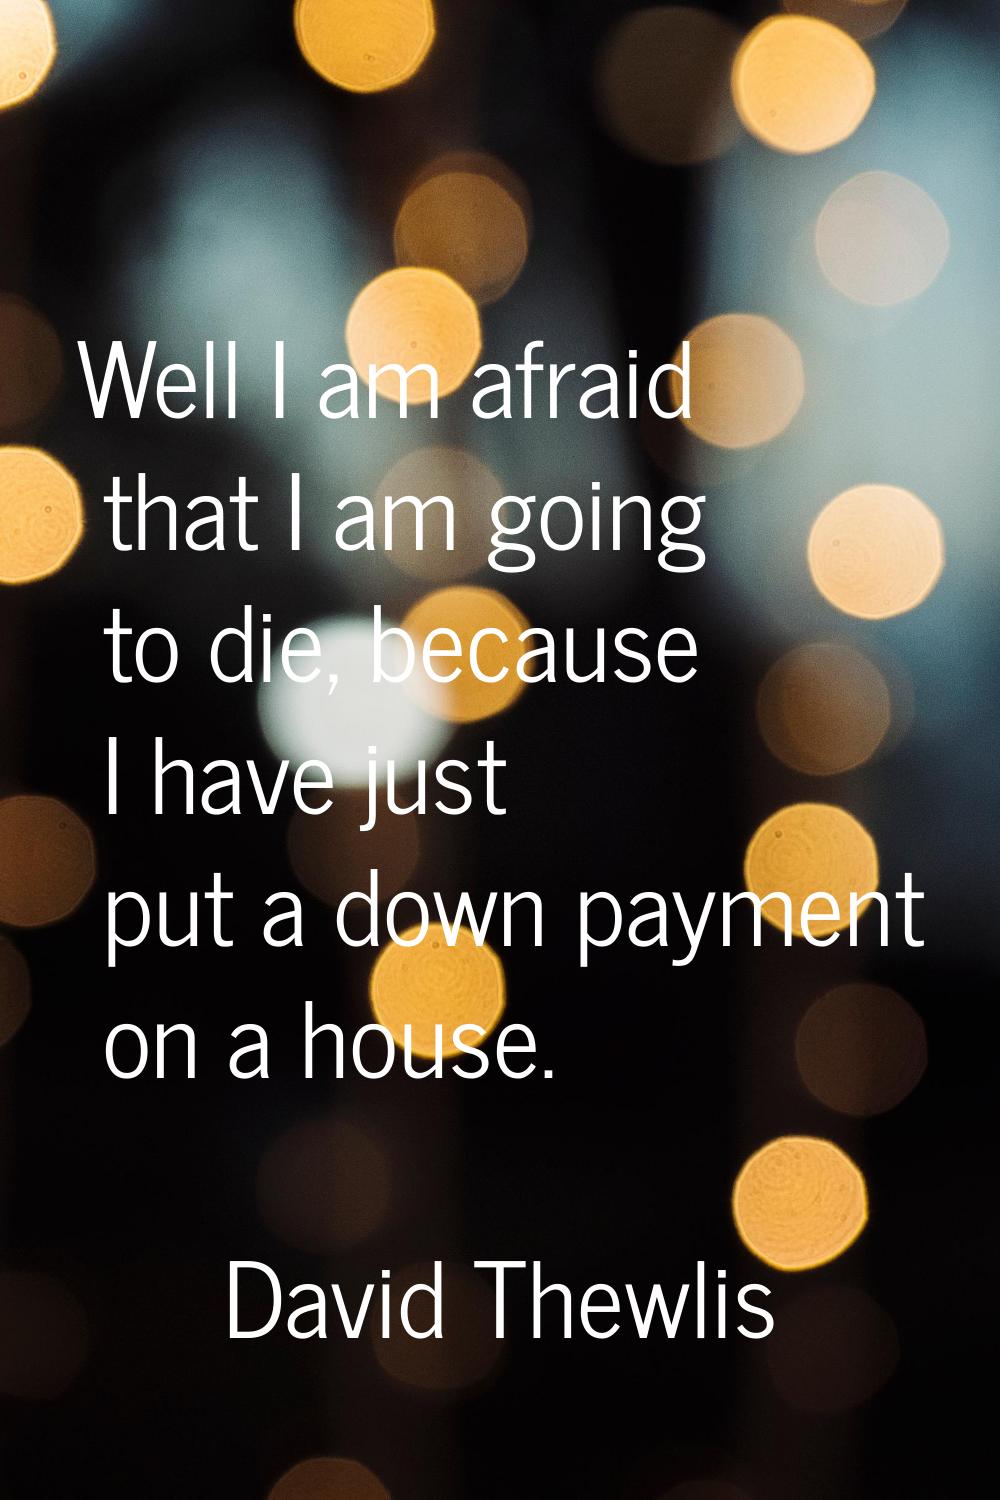 Well I am afraid that I am going to die, because I have just put a down payment on a house.